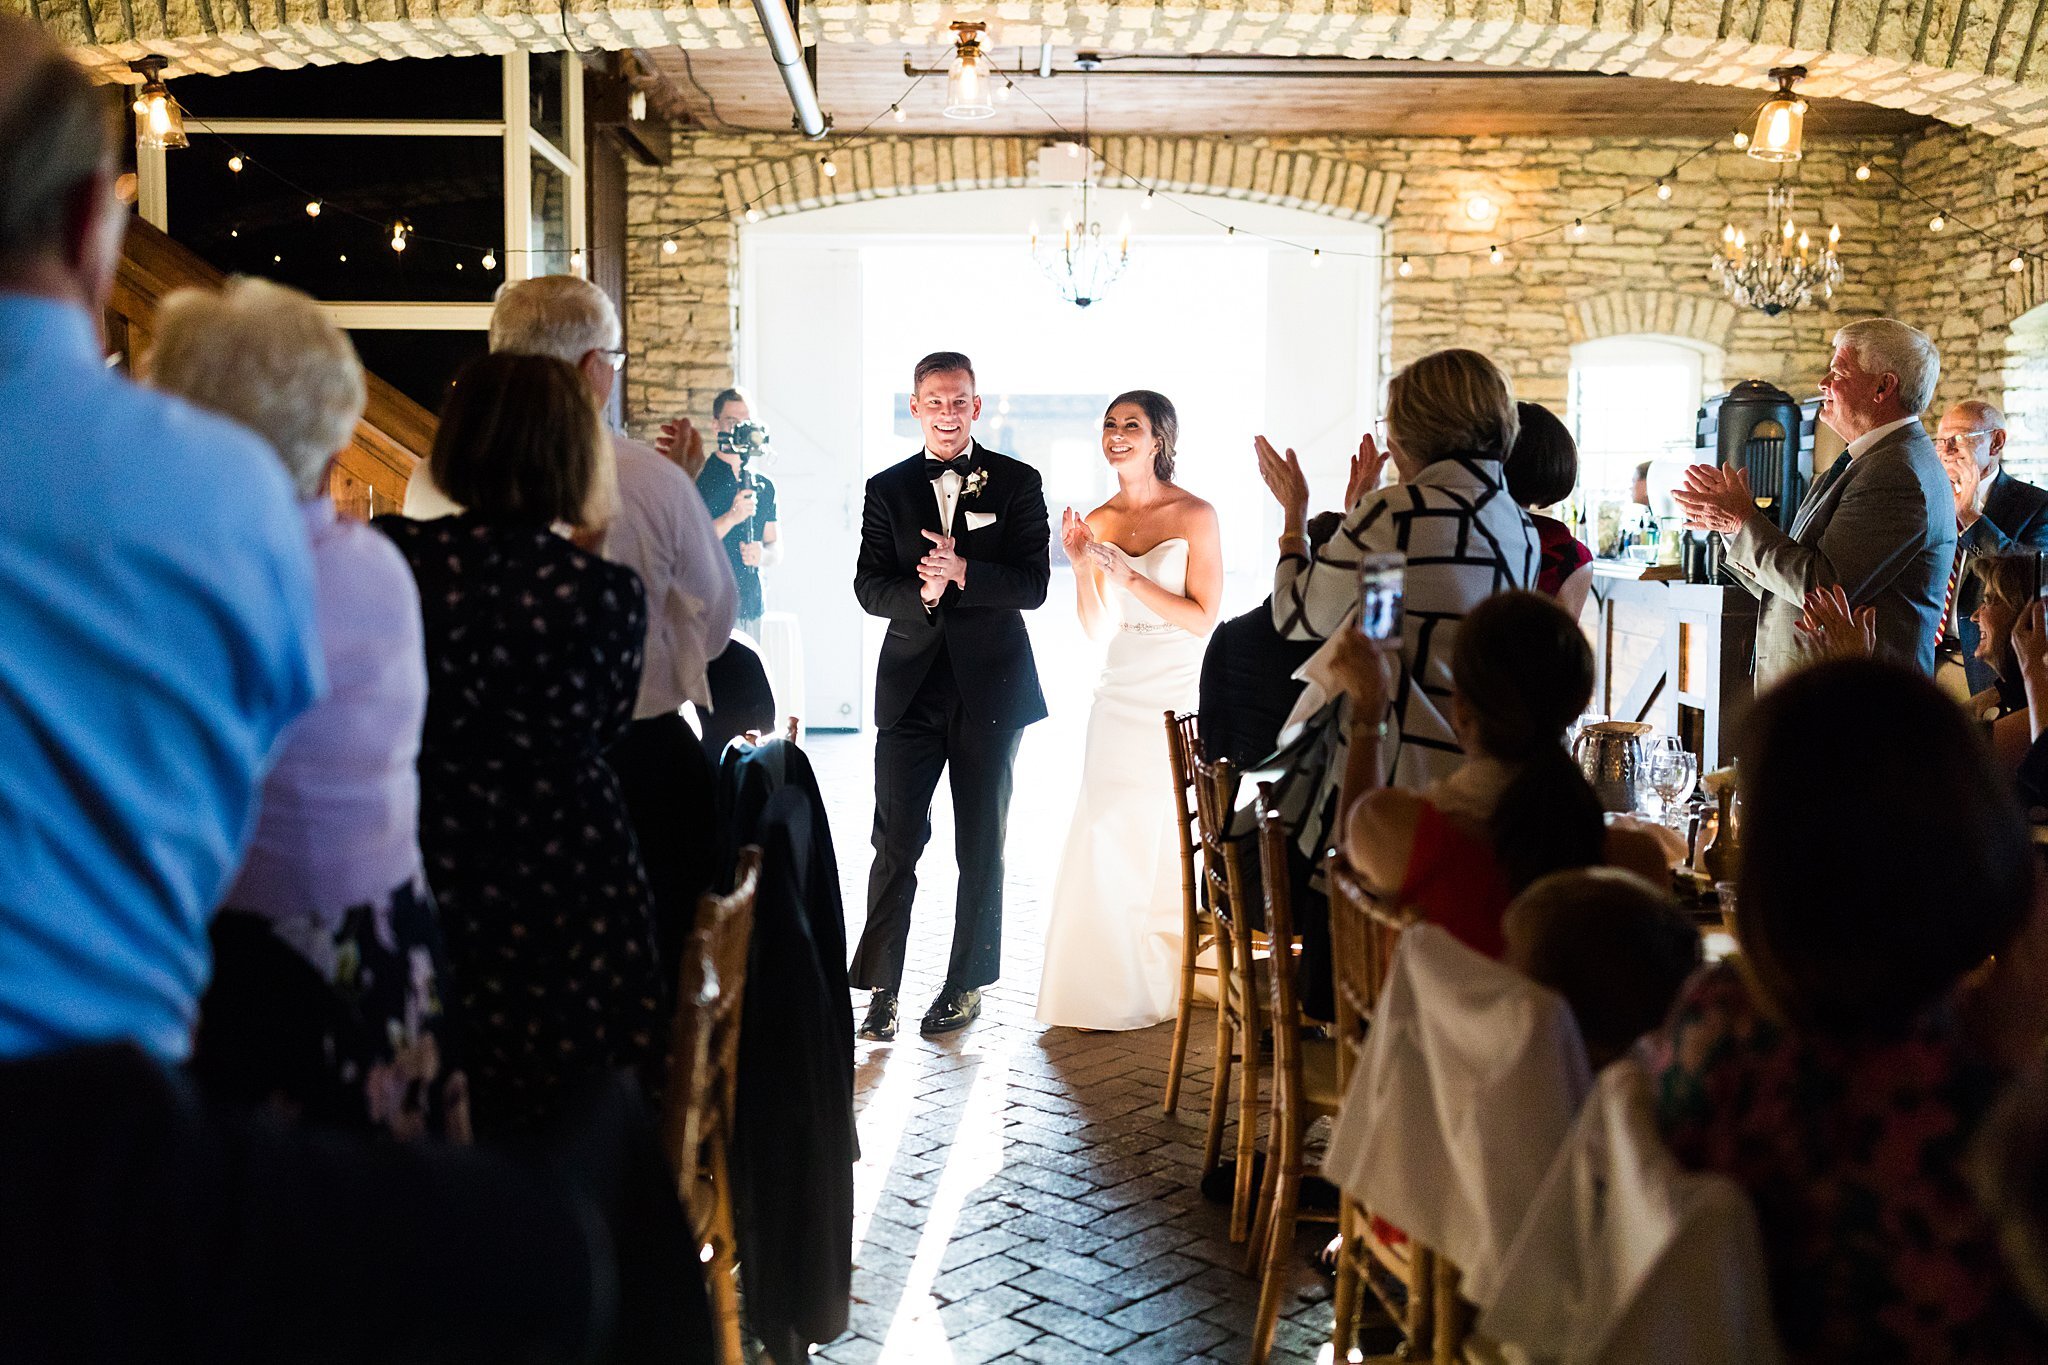  Guests welcoming bride and groom to wedding reception at Mayowood Stone Barn. 